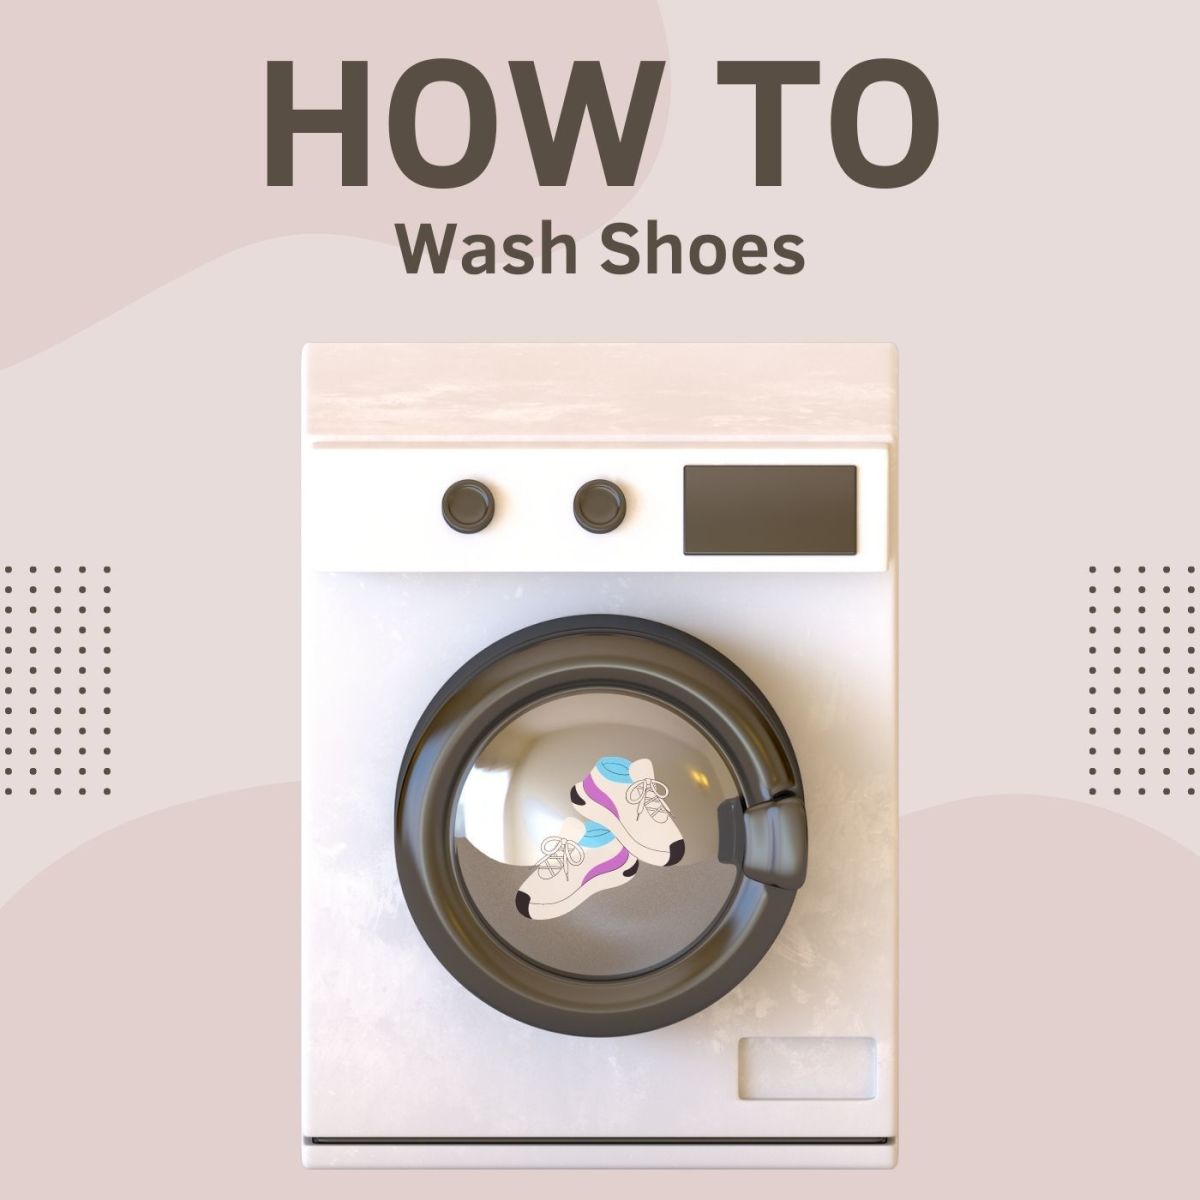 Washing your shoes is super easy!